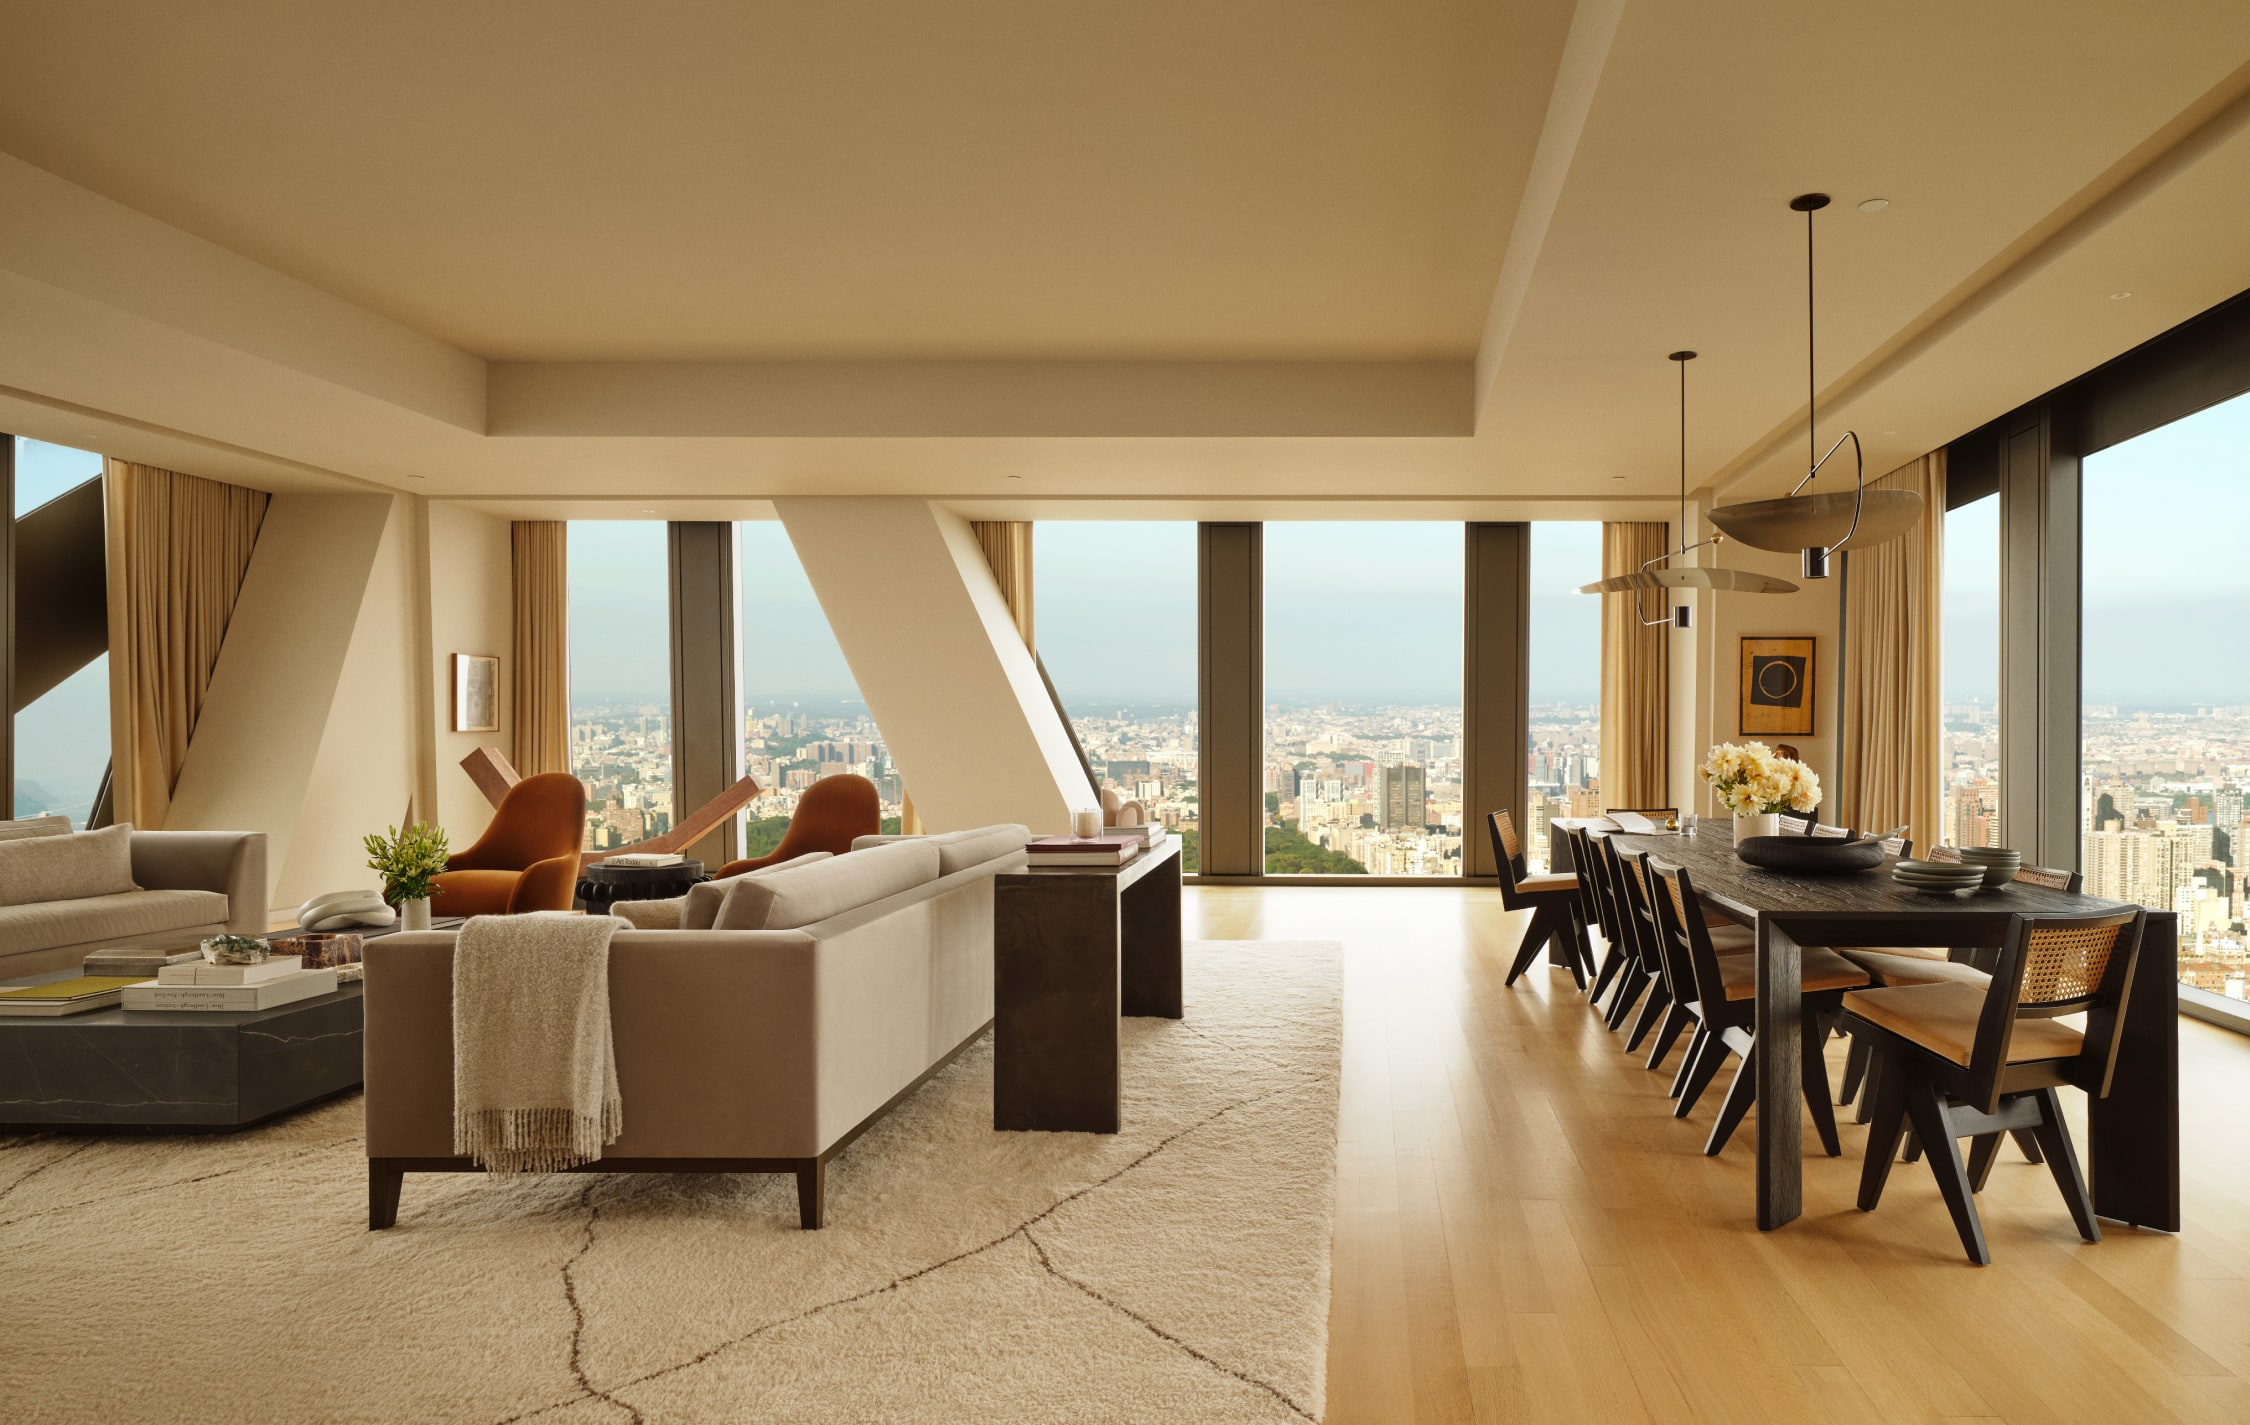 Living area and dining table in a midtown condominium with a view of NYC